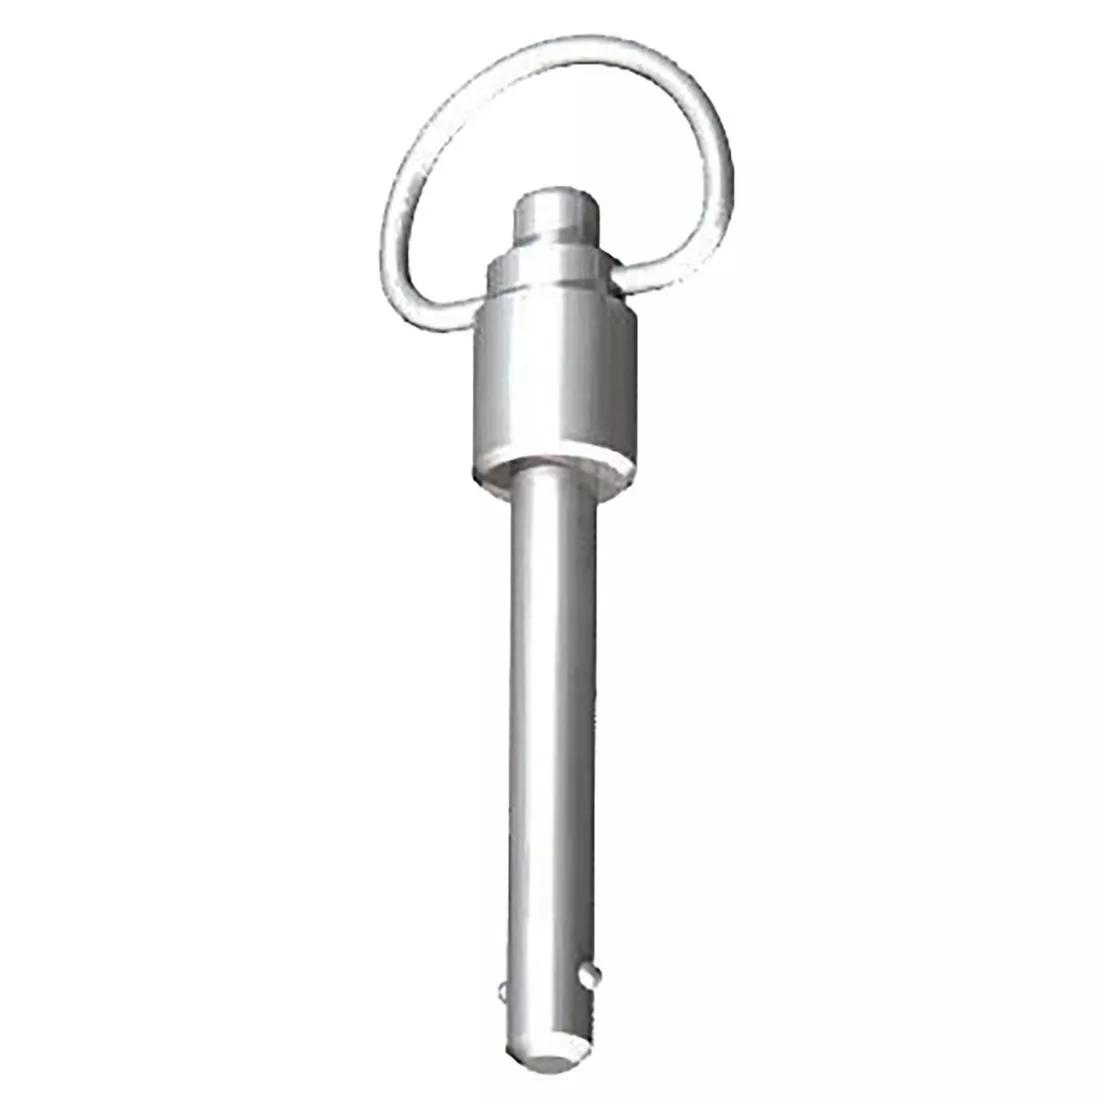 Quick Release Positive Locking Pins (Pip Pins), Ring Handle